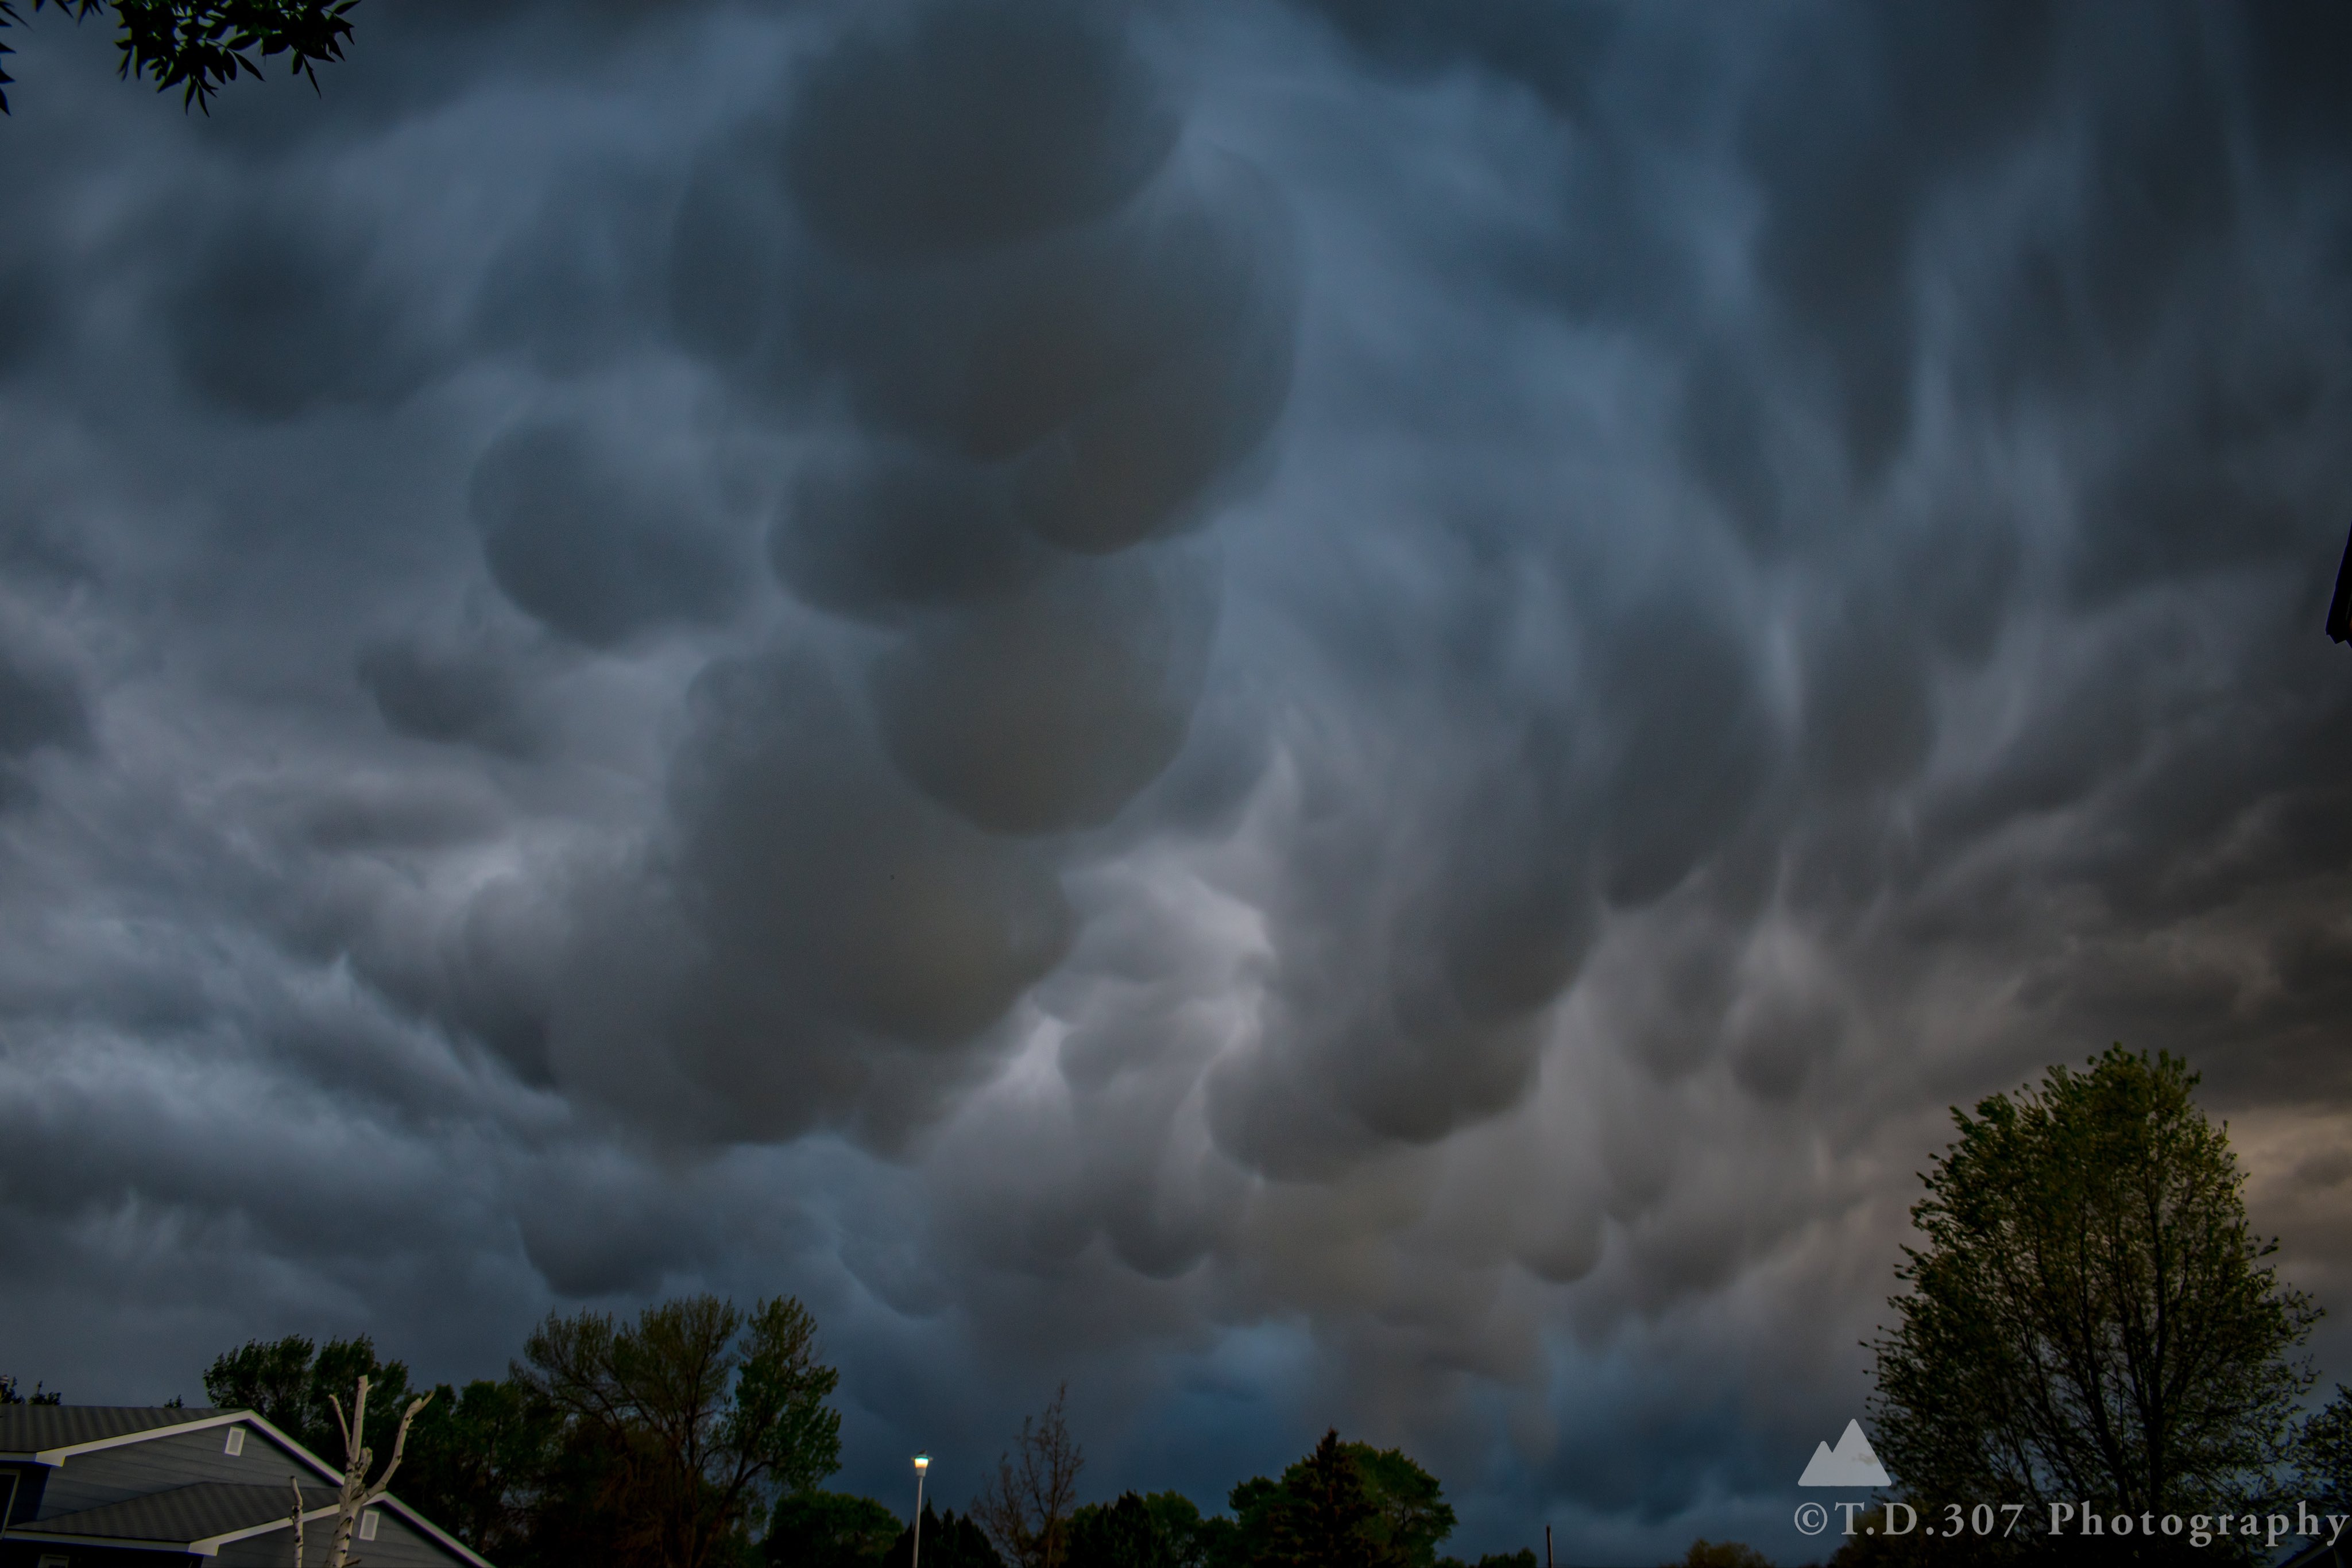 3rd Place Stunning Mammatus Clouds over Northwest Wyoming by T.D.307 Photography @TonyD2155